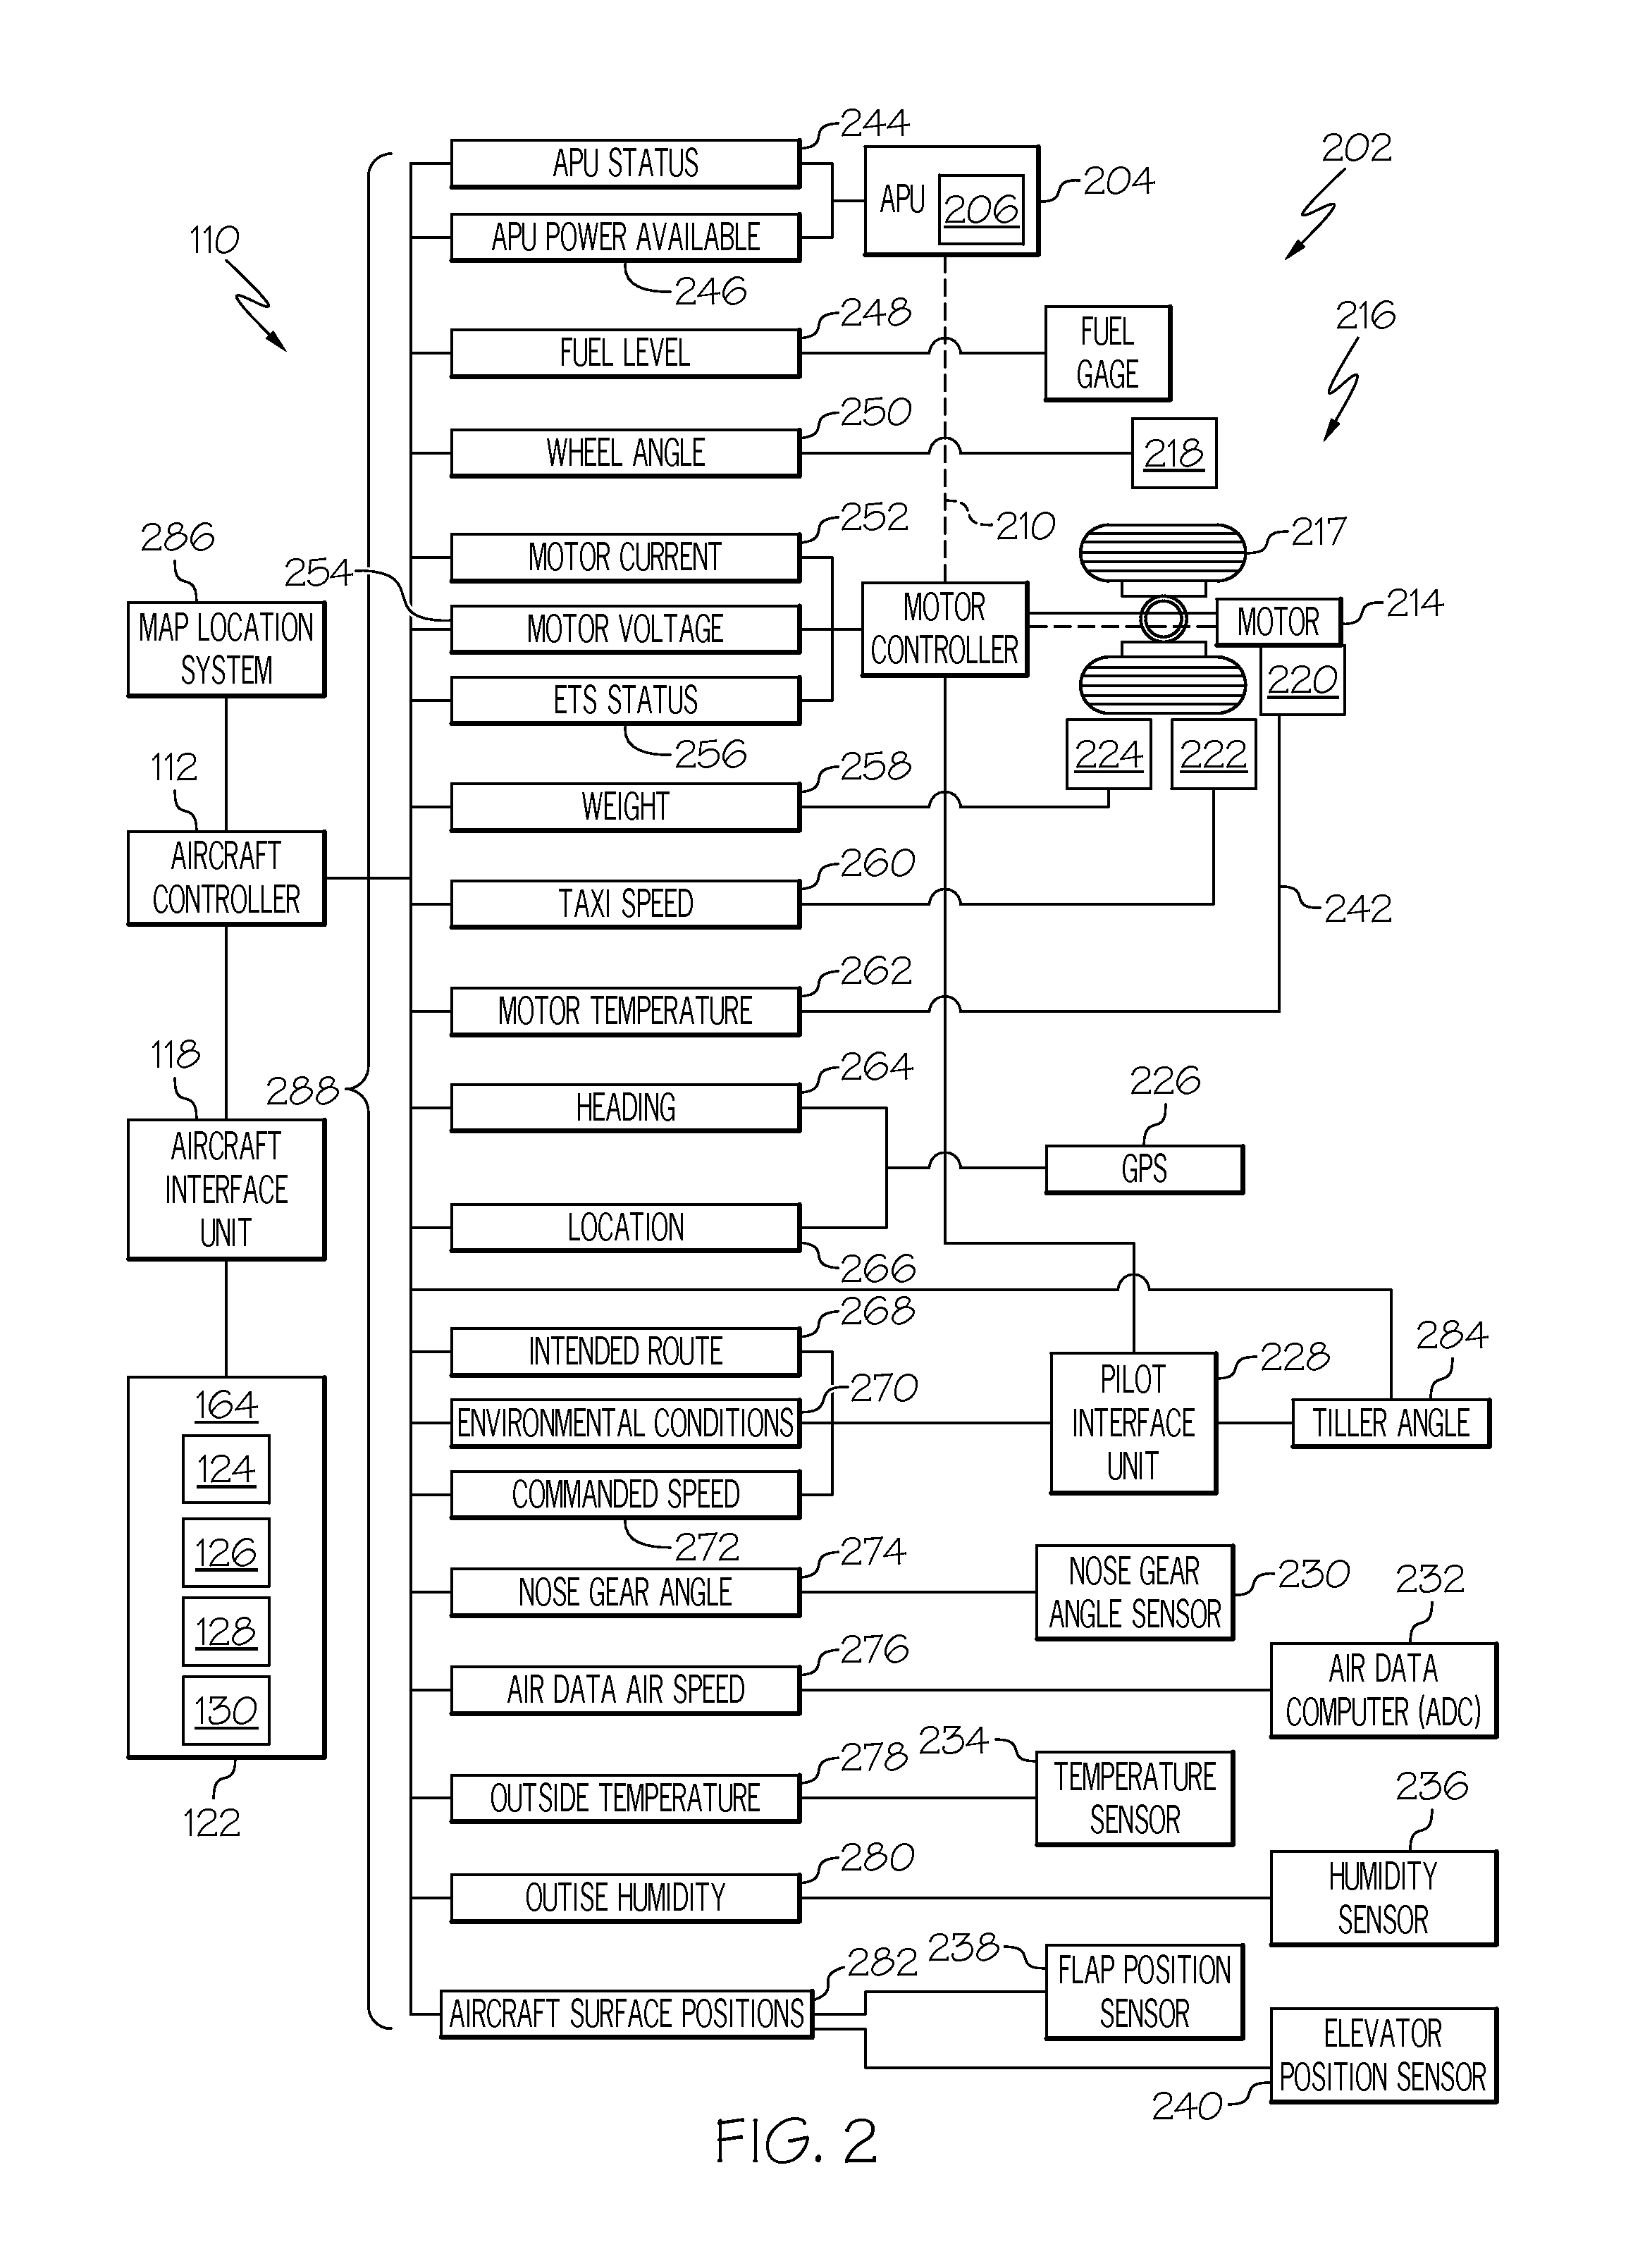 Aircraft electric taxi system diagnostic and prognostic evaluation system and method